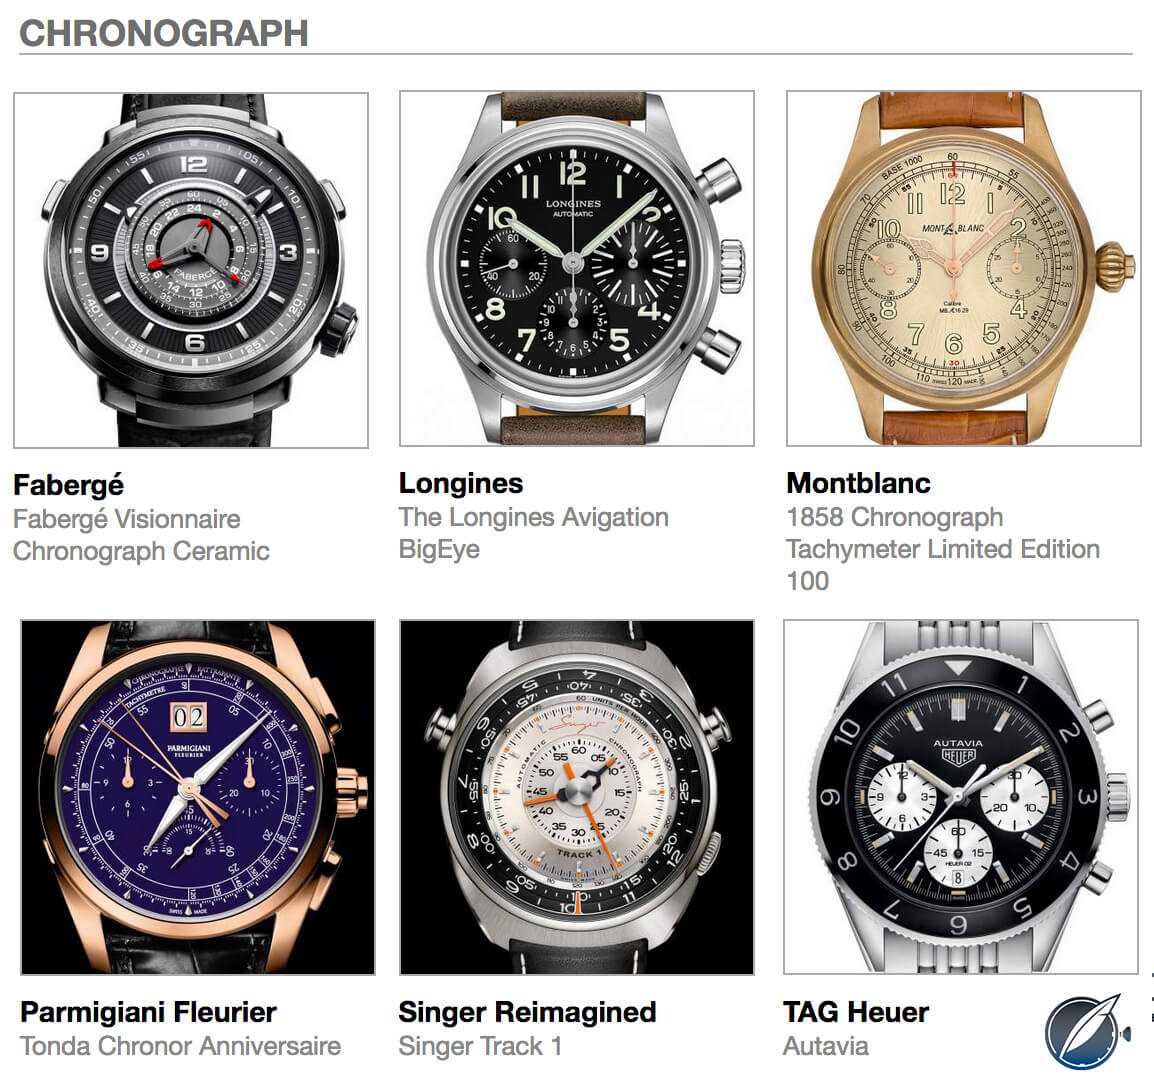 pre-selected Chronograph watches for the 2017 GPHG are, clockwise from top left above: Fabergé Visionnaire Chronograph Ceramic, Longines Avigation BigEye, Montblanc 1858 Chronograph Tachymeter Limited Edition 100, Parmigiani Fleurier Tonda Chrono Anniversaire, Singer Reimagined Track 1, and TAG Heuer Autavia.